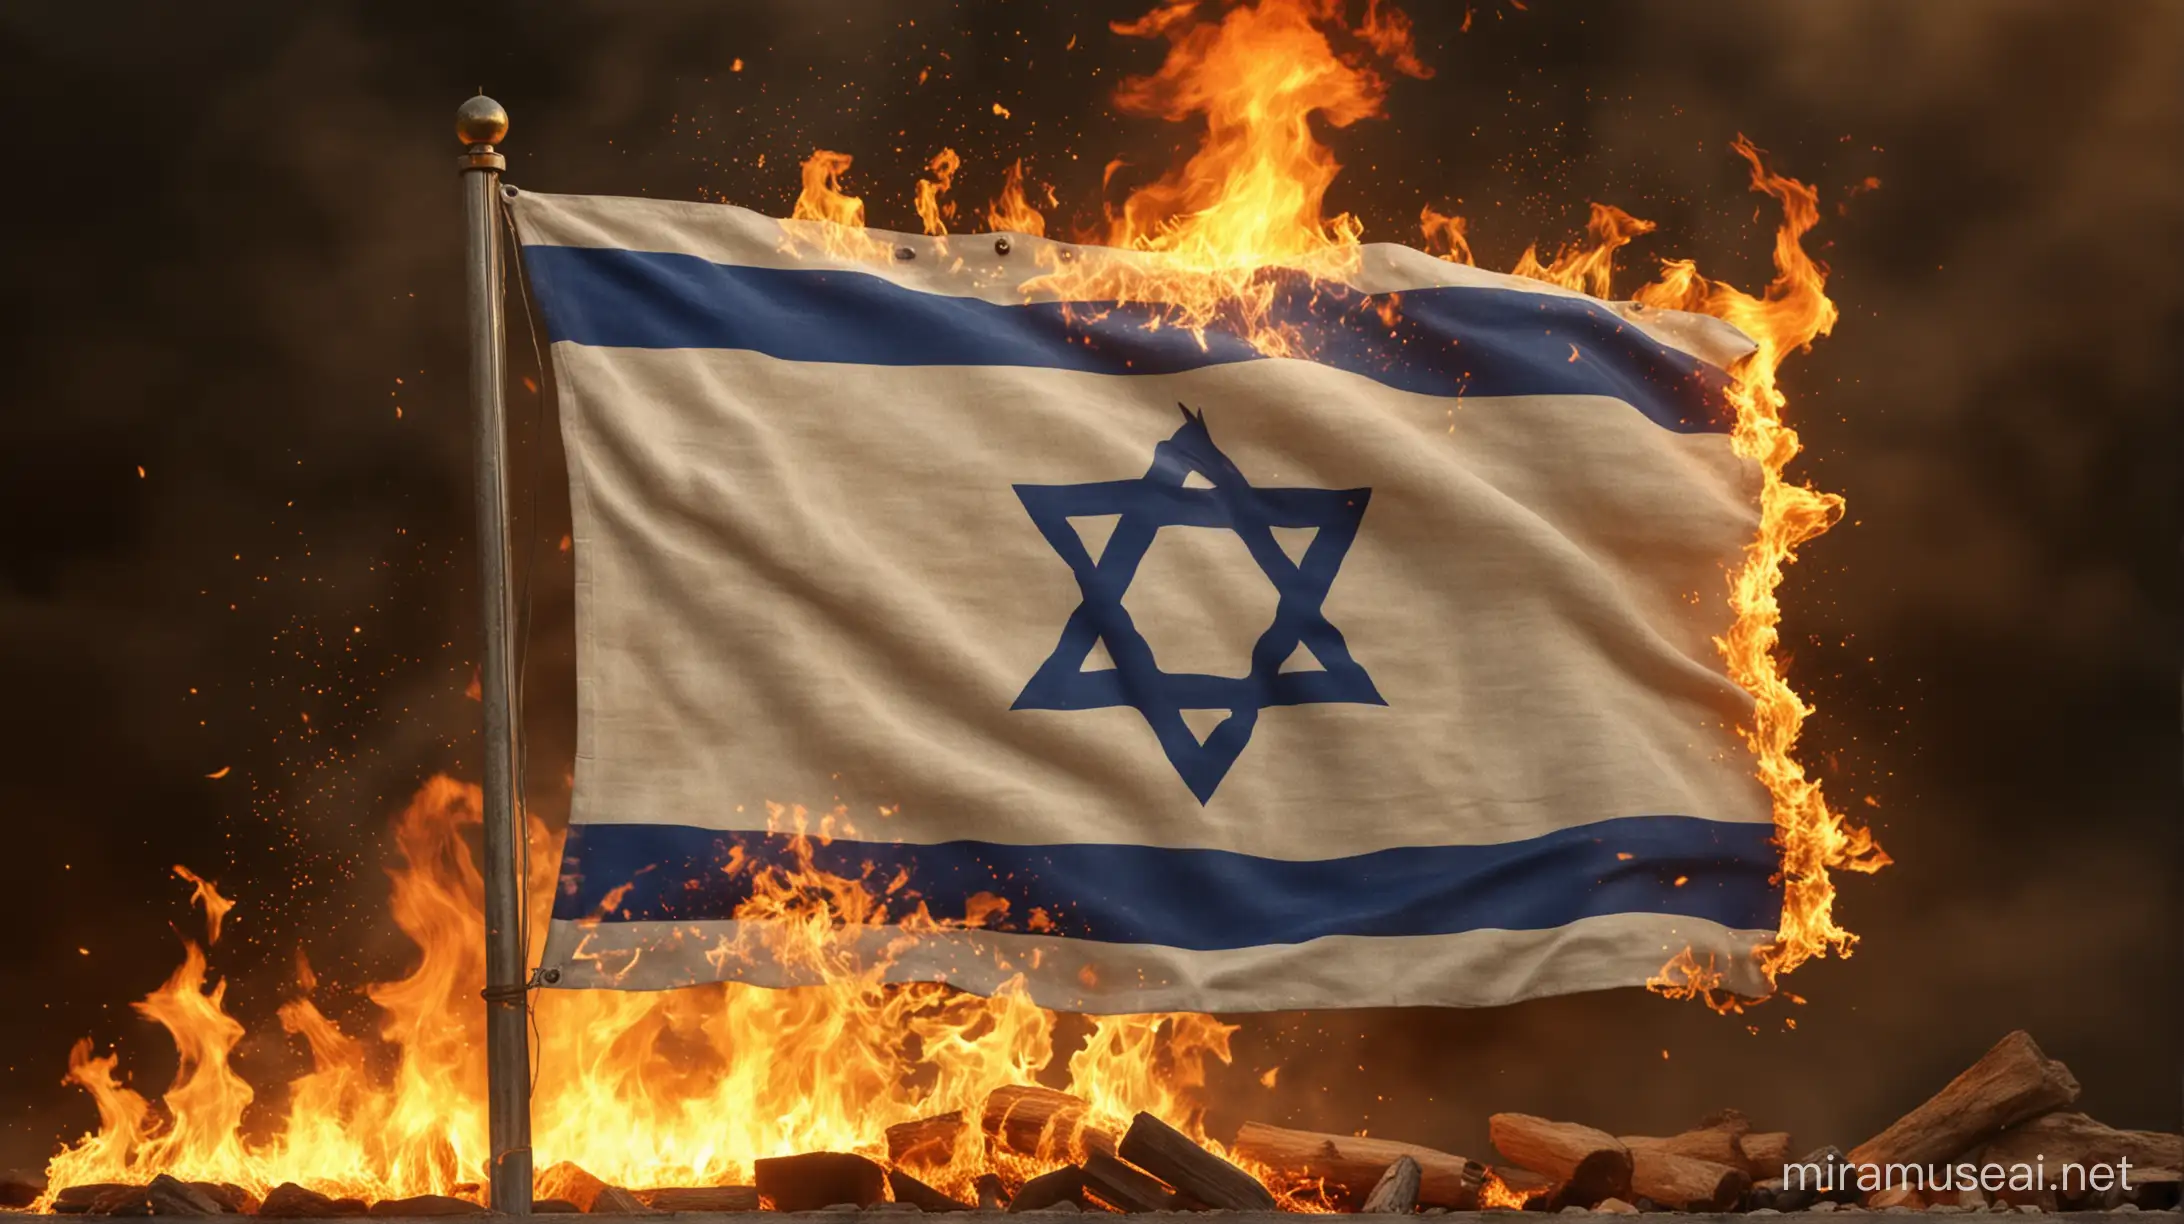 The flag of Israel multidimensionally on Leijona. Fire flames in the picture. 